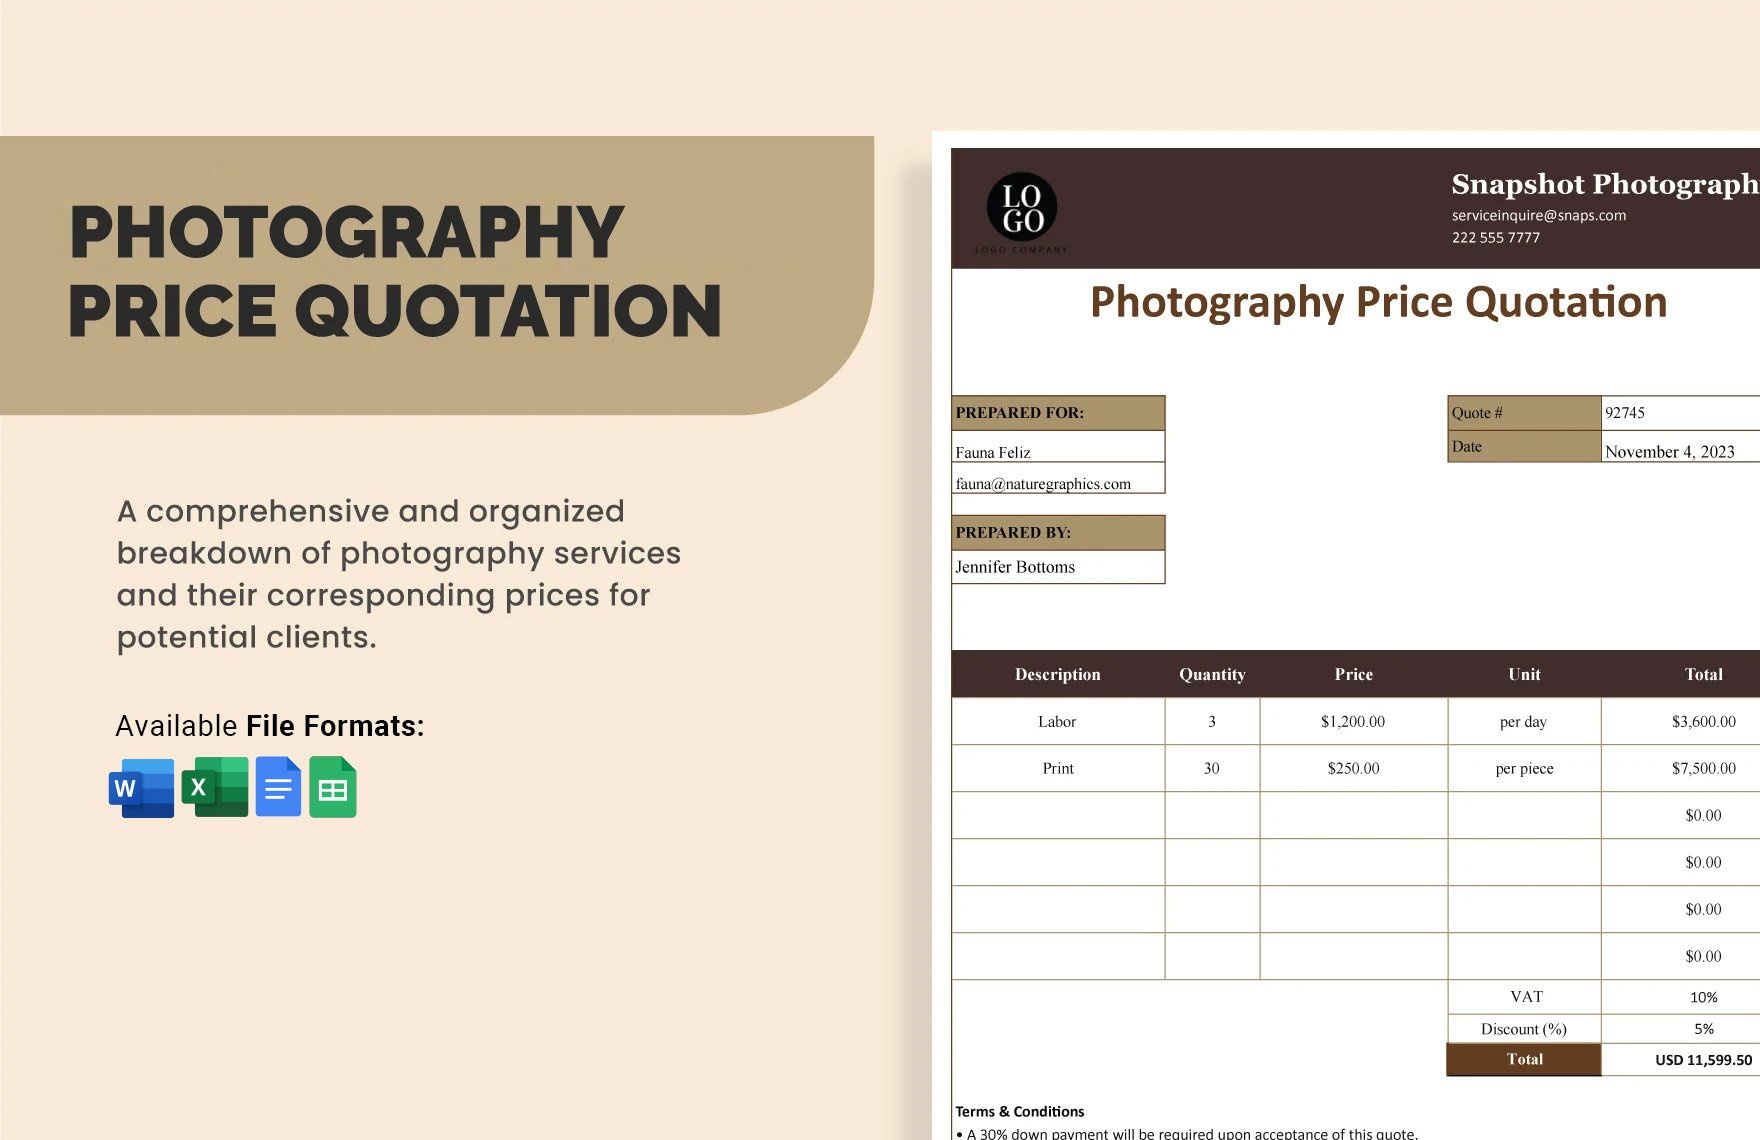 Free Photography Price Quotation Template in Word, Google Docs, Excel, Google Sheets